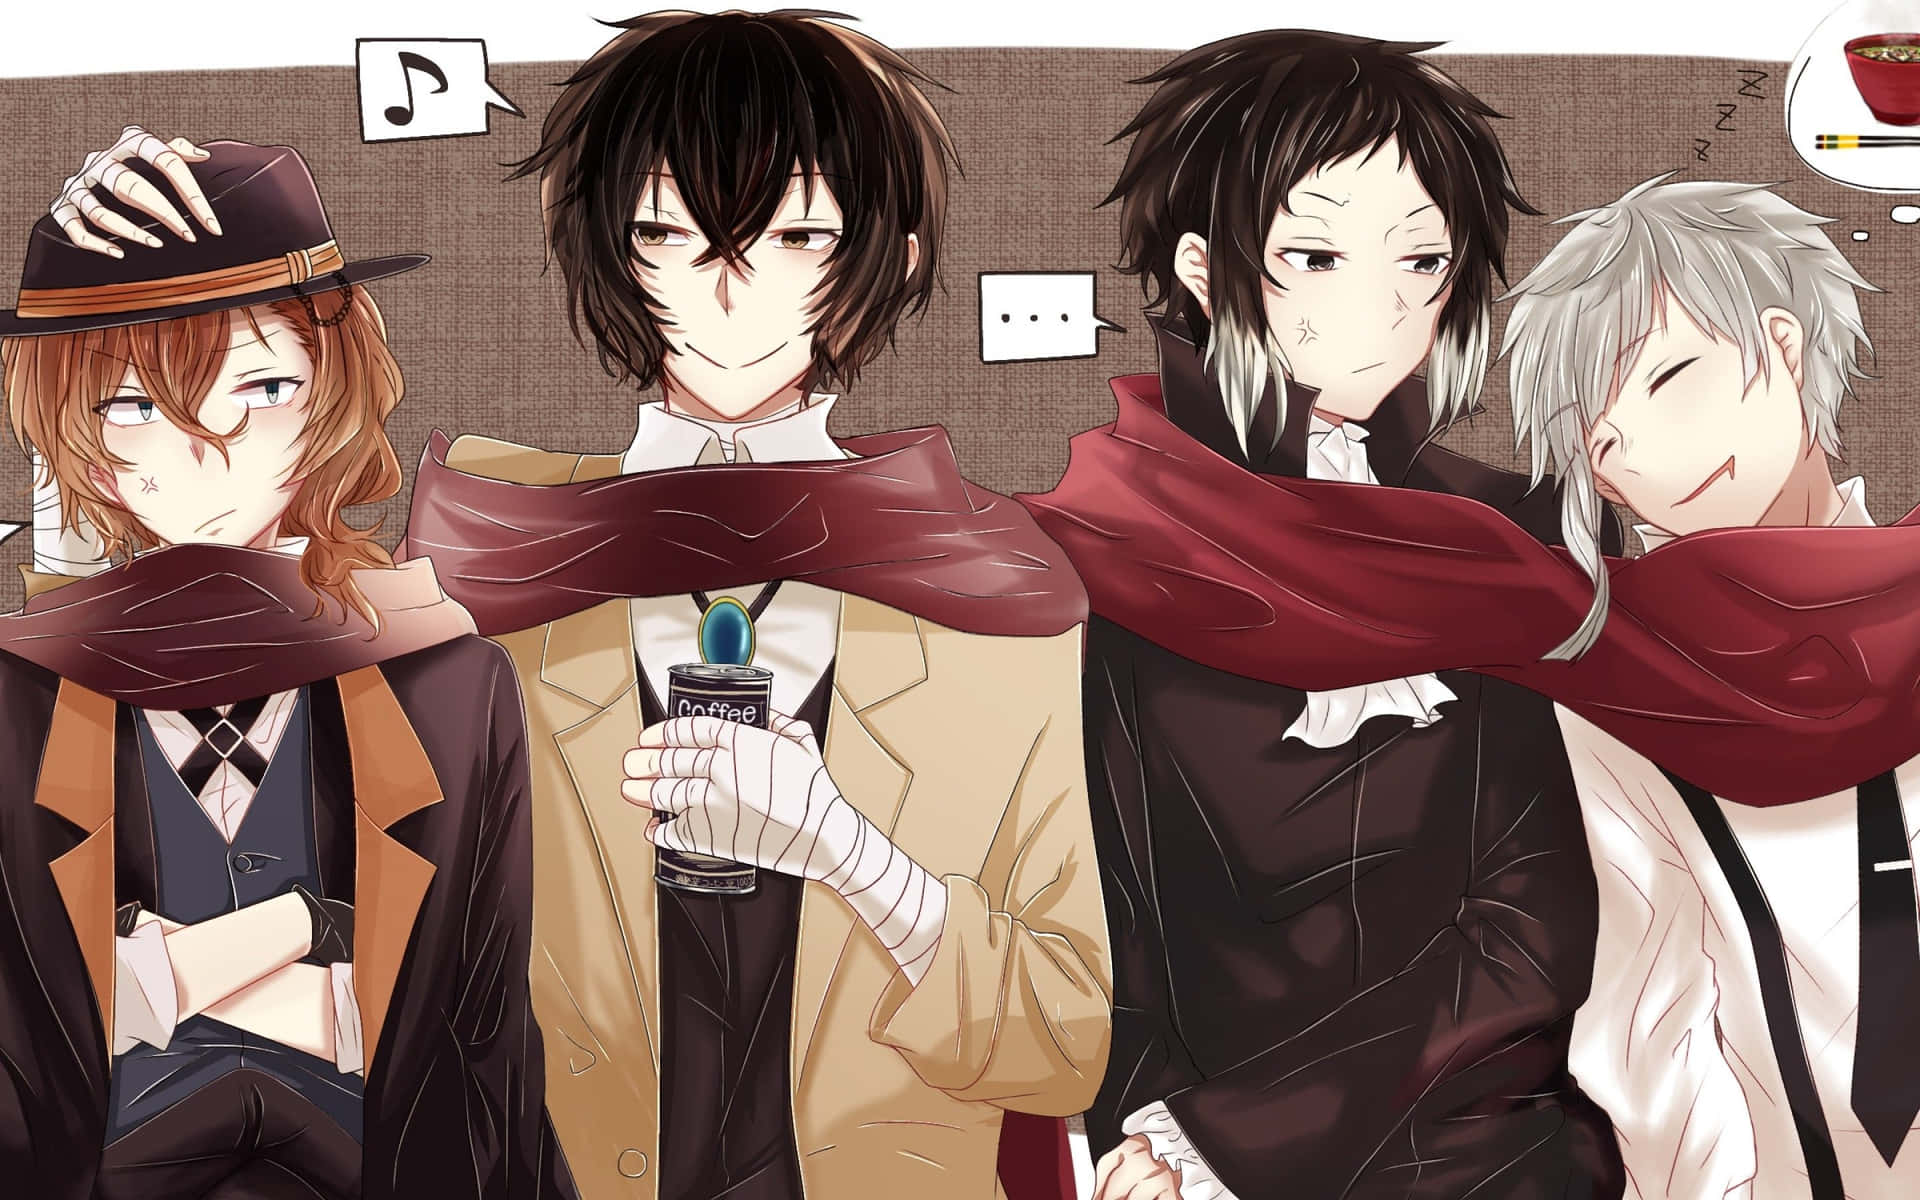 New adventures await in Bungo Stray Dogs.